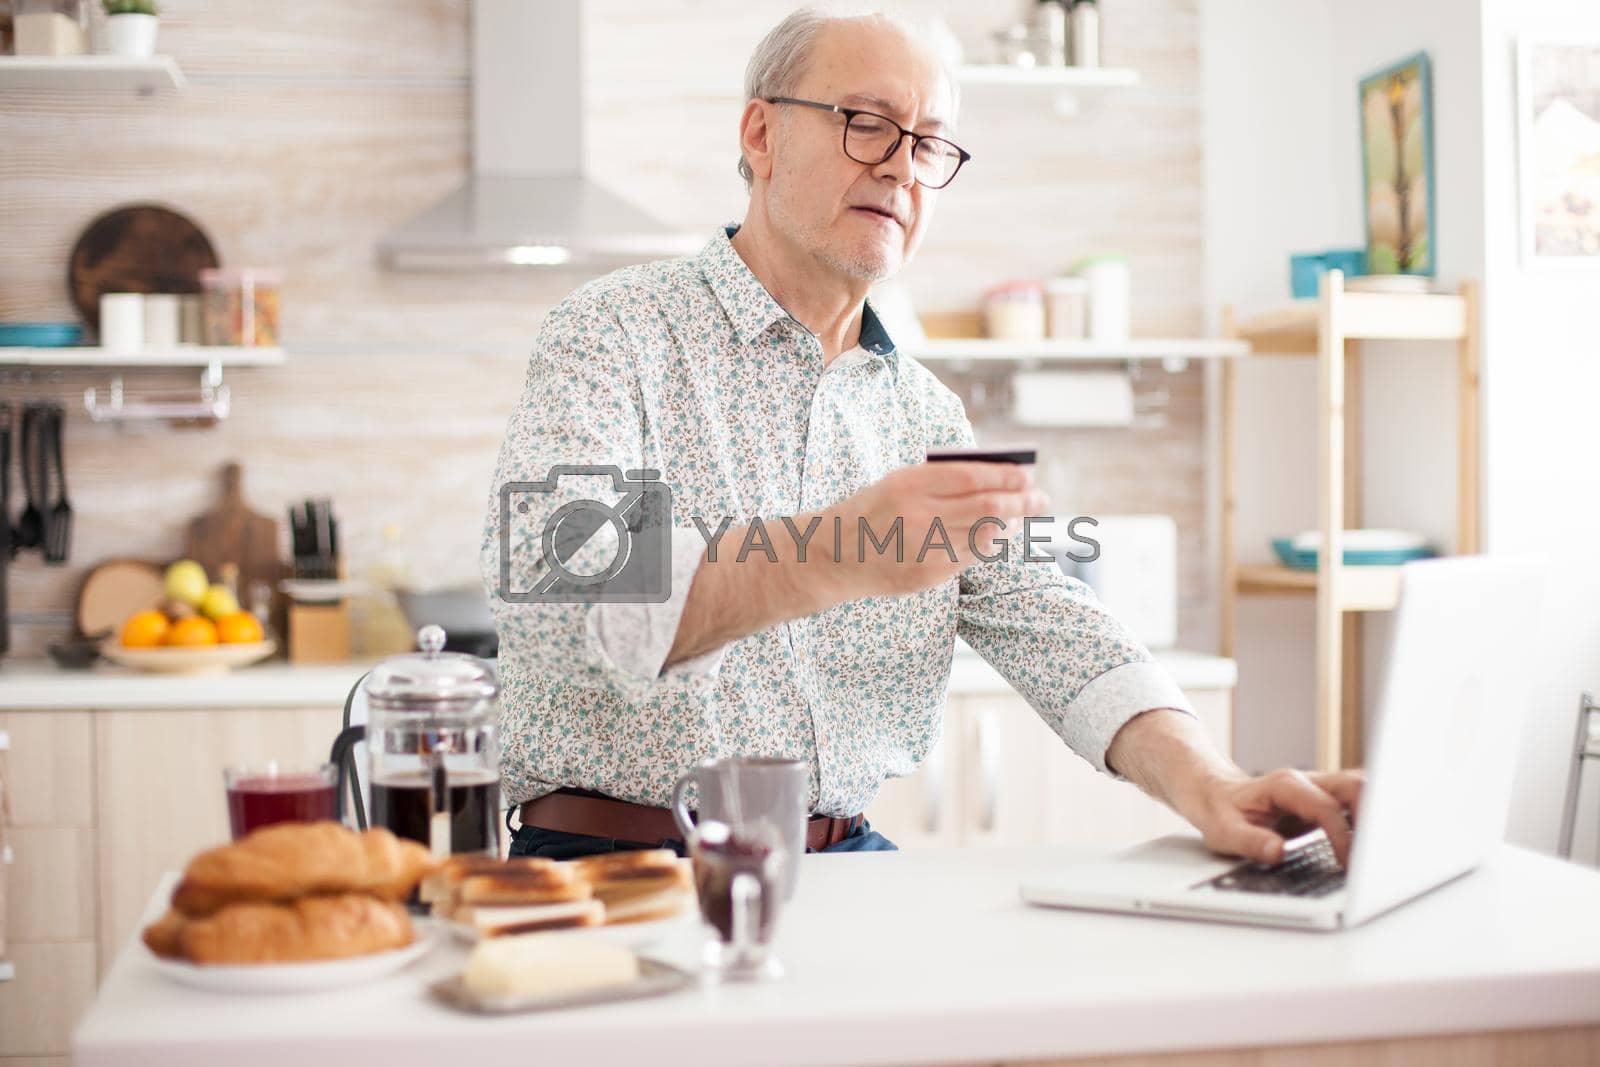 Royalty free image of Pensioner entering pin number by DCStudio